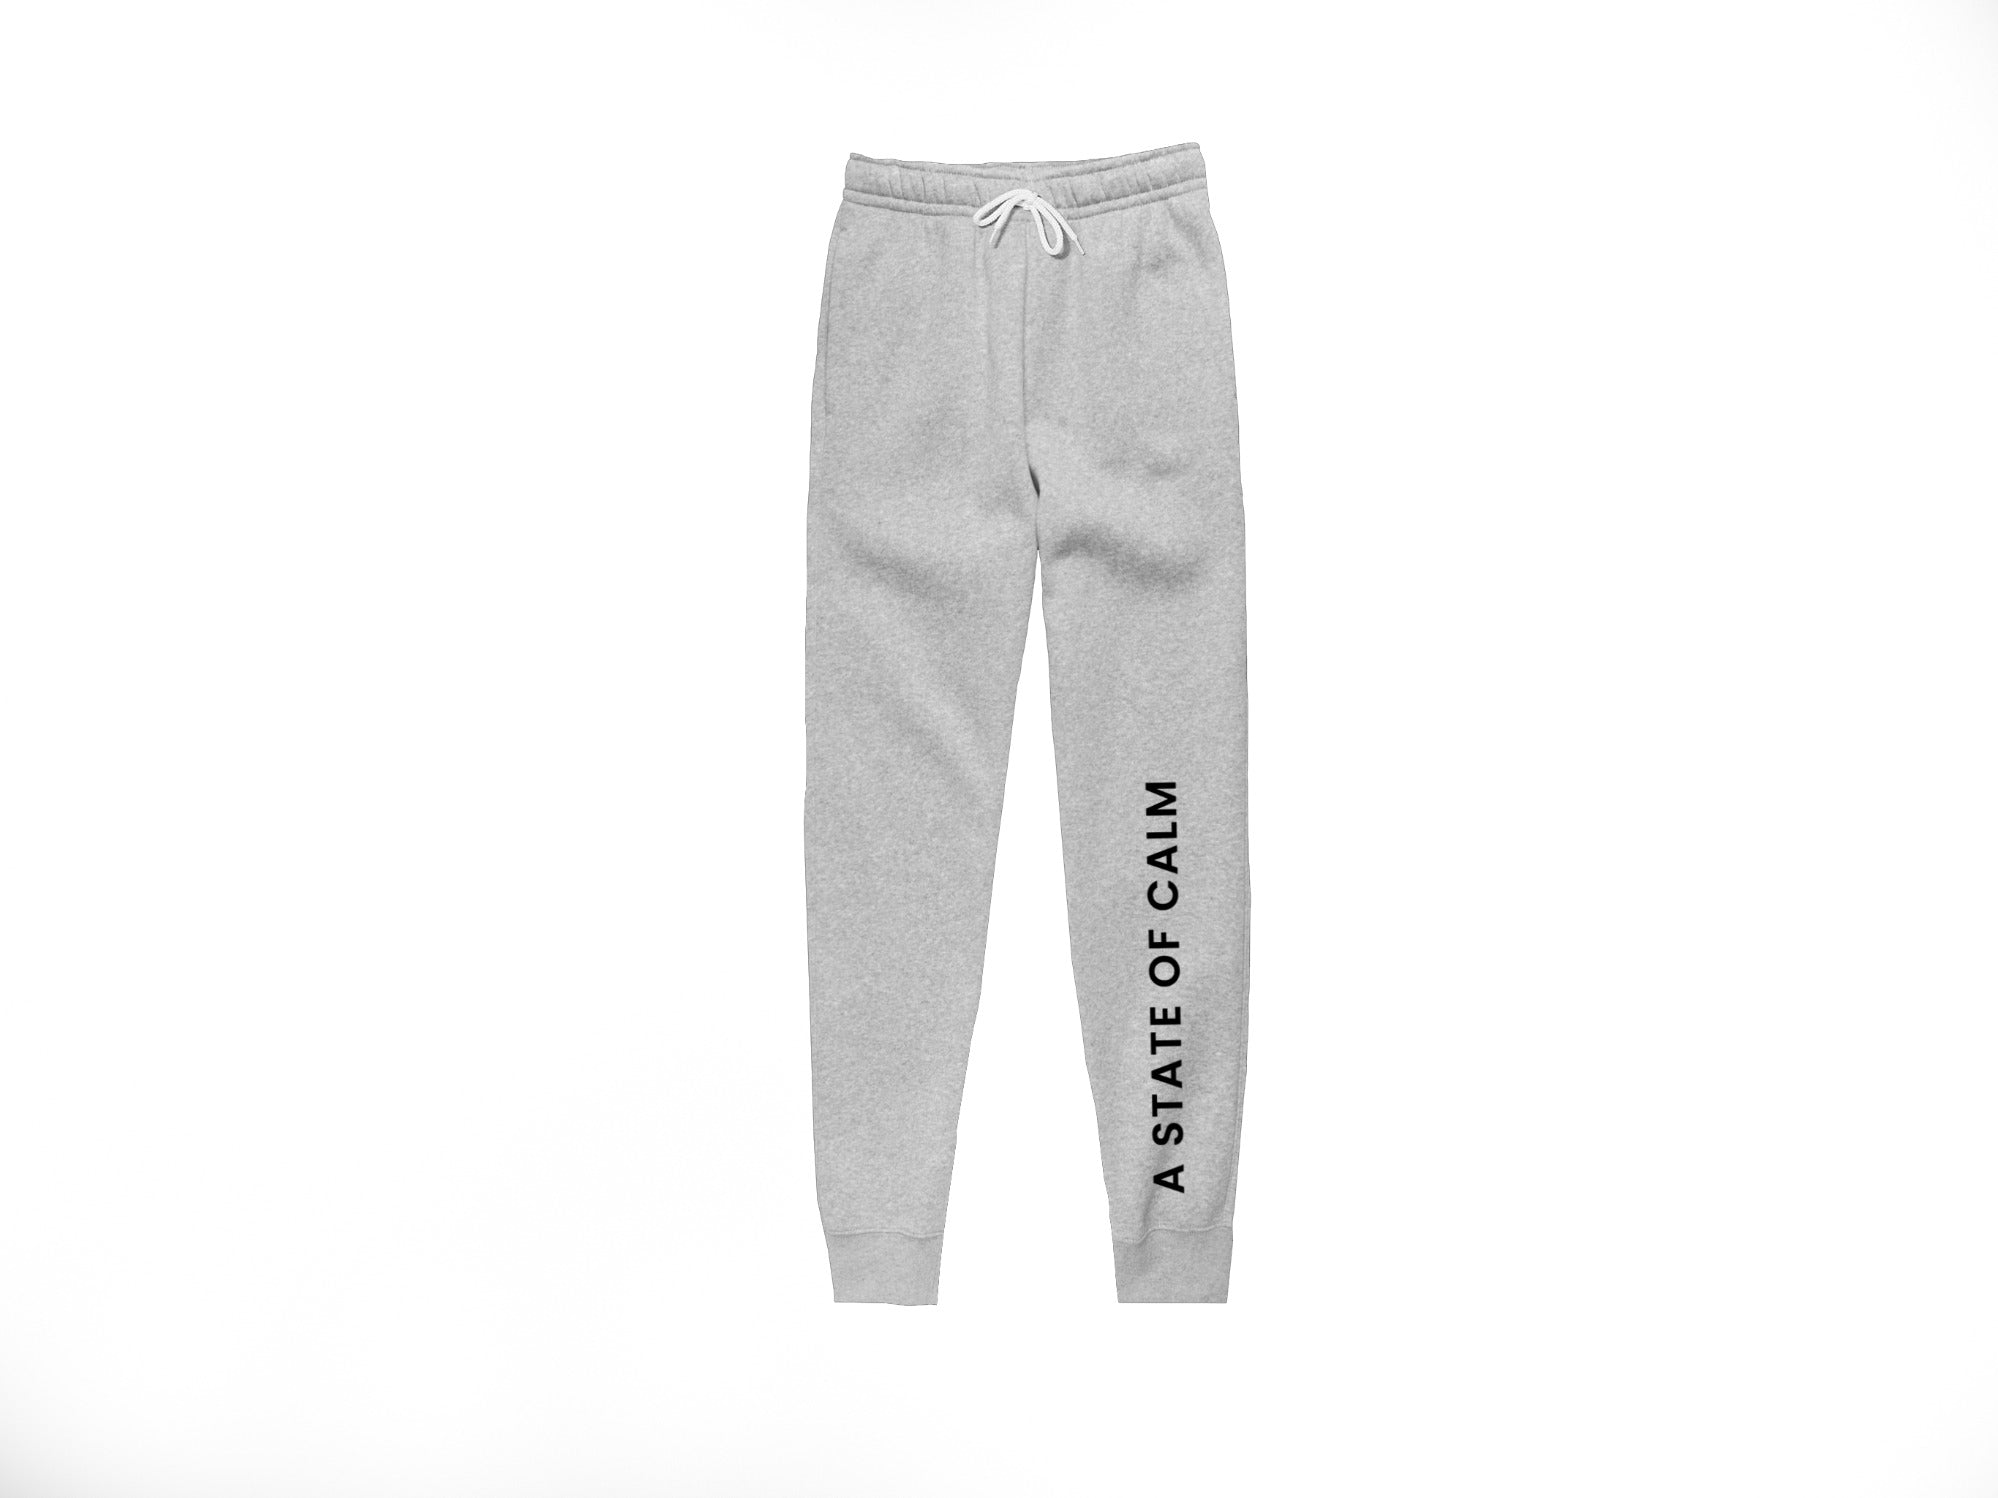 
  
  GREY STATE OF CALM COZY JOGGER BOTTOMS Unisex
  
